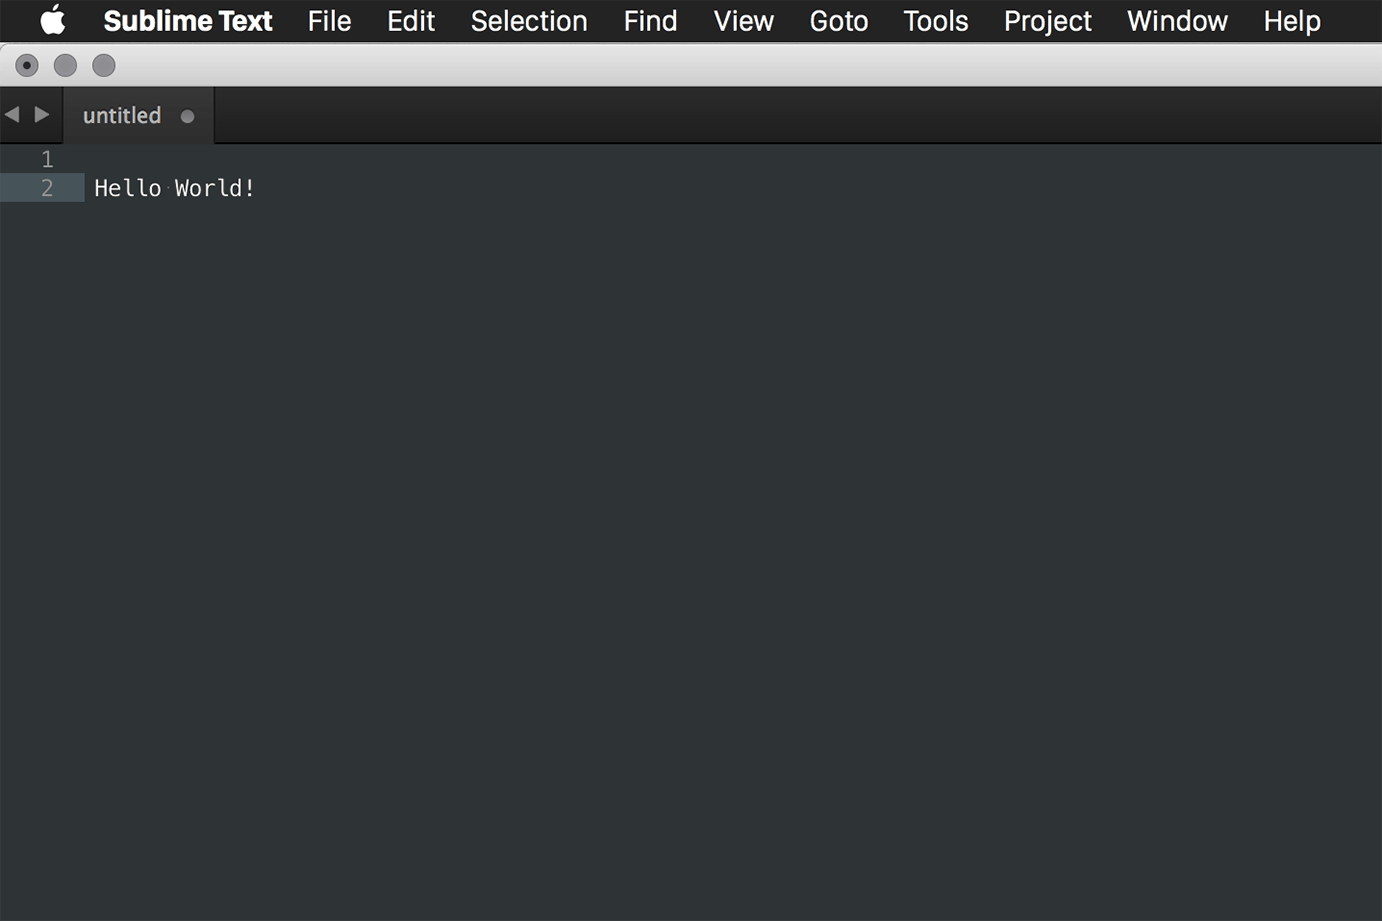 Image of Sublime Text with open file - Text: Hello World!.